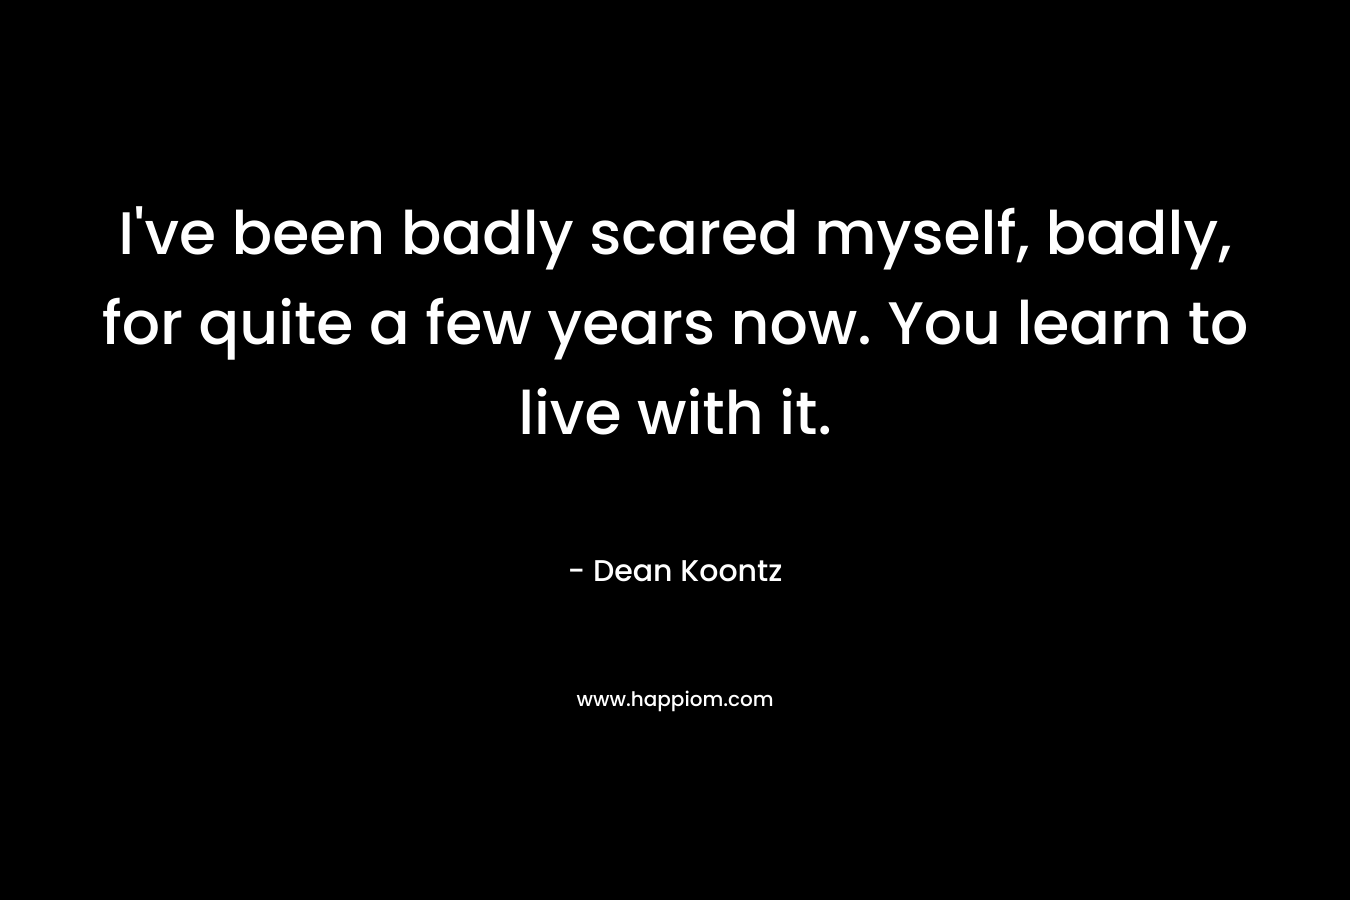 I've been badly scared myself, badly, for quite a few years now. You learn to live with it.